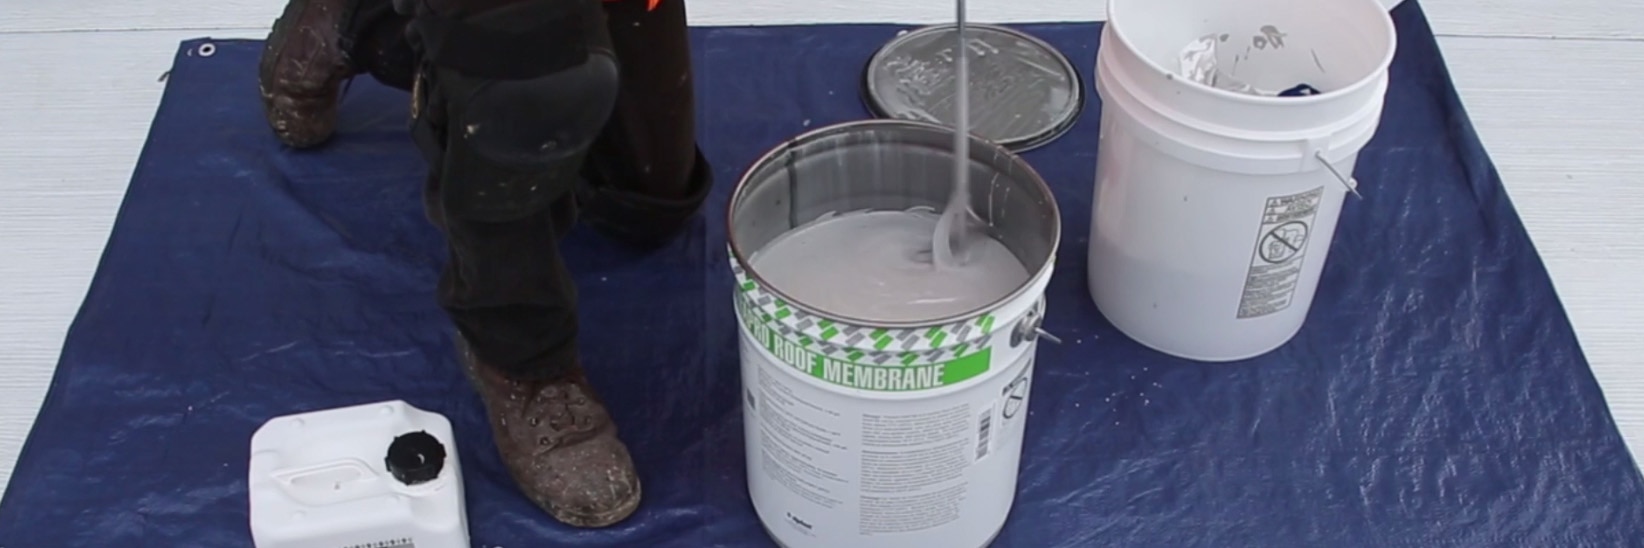 mixing or catalyzing Parapro Roof Membrane